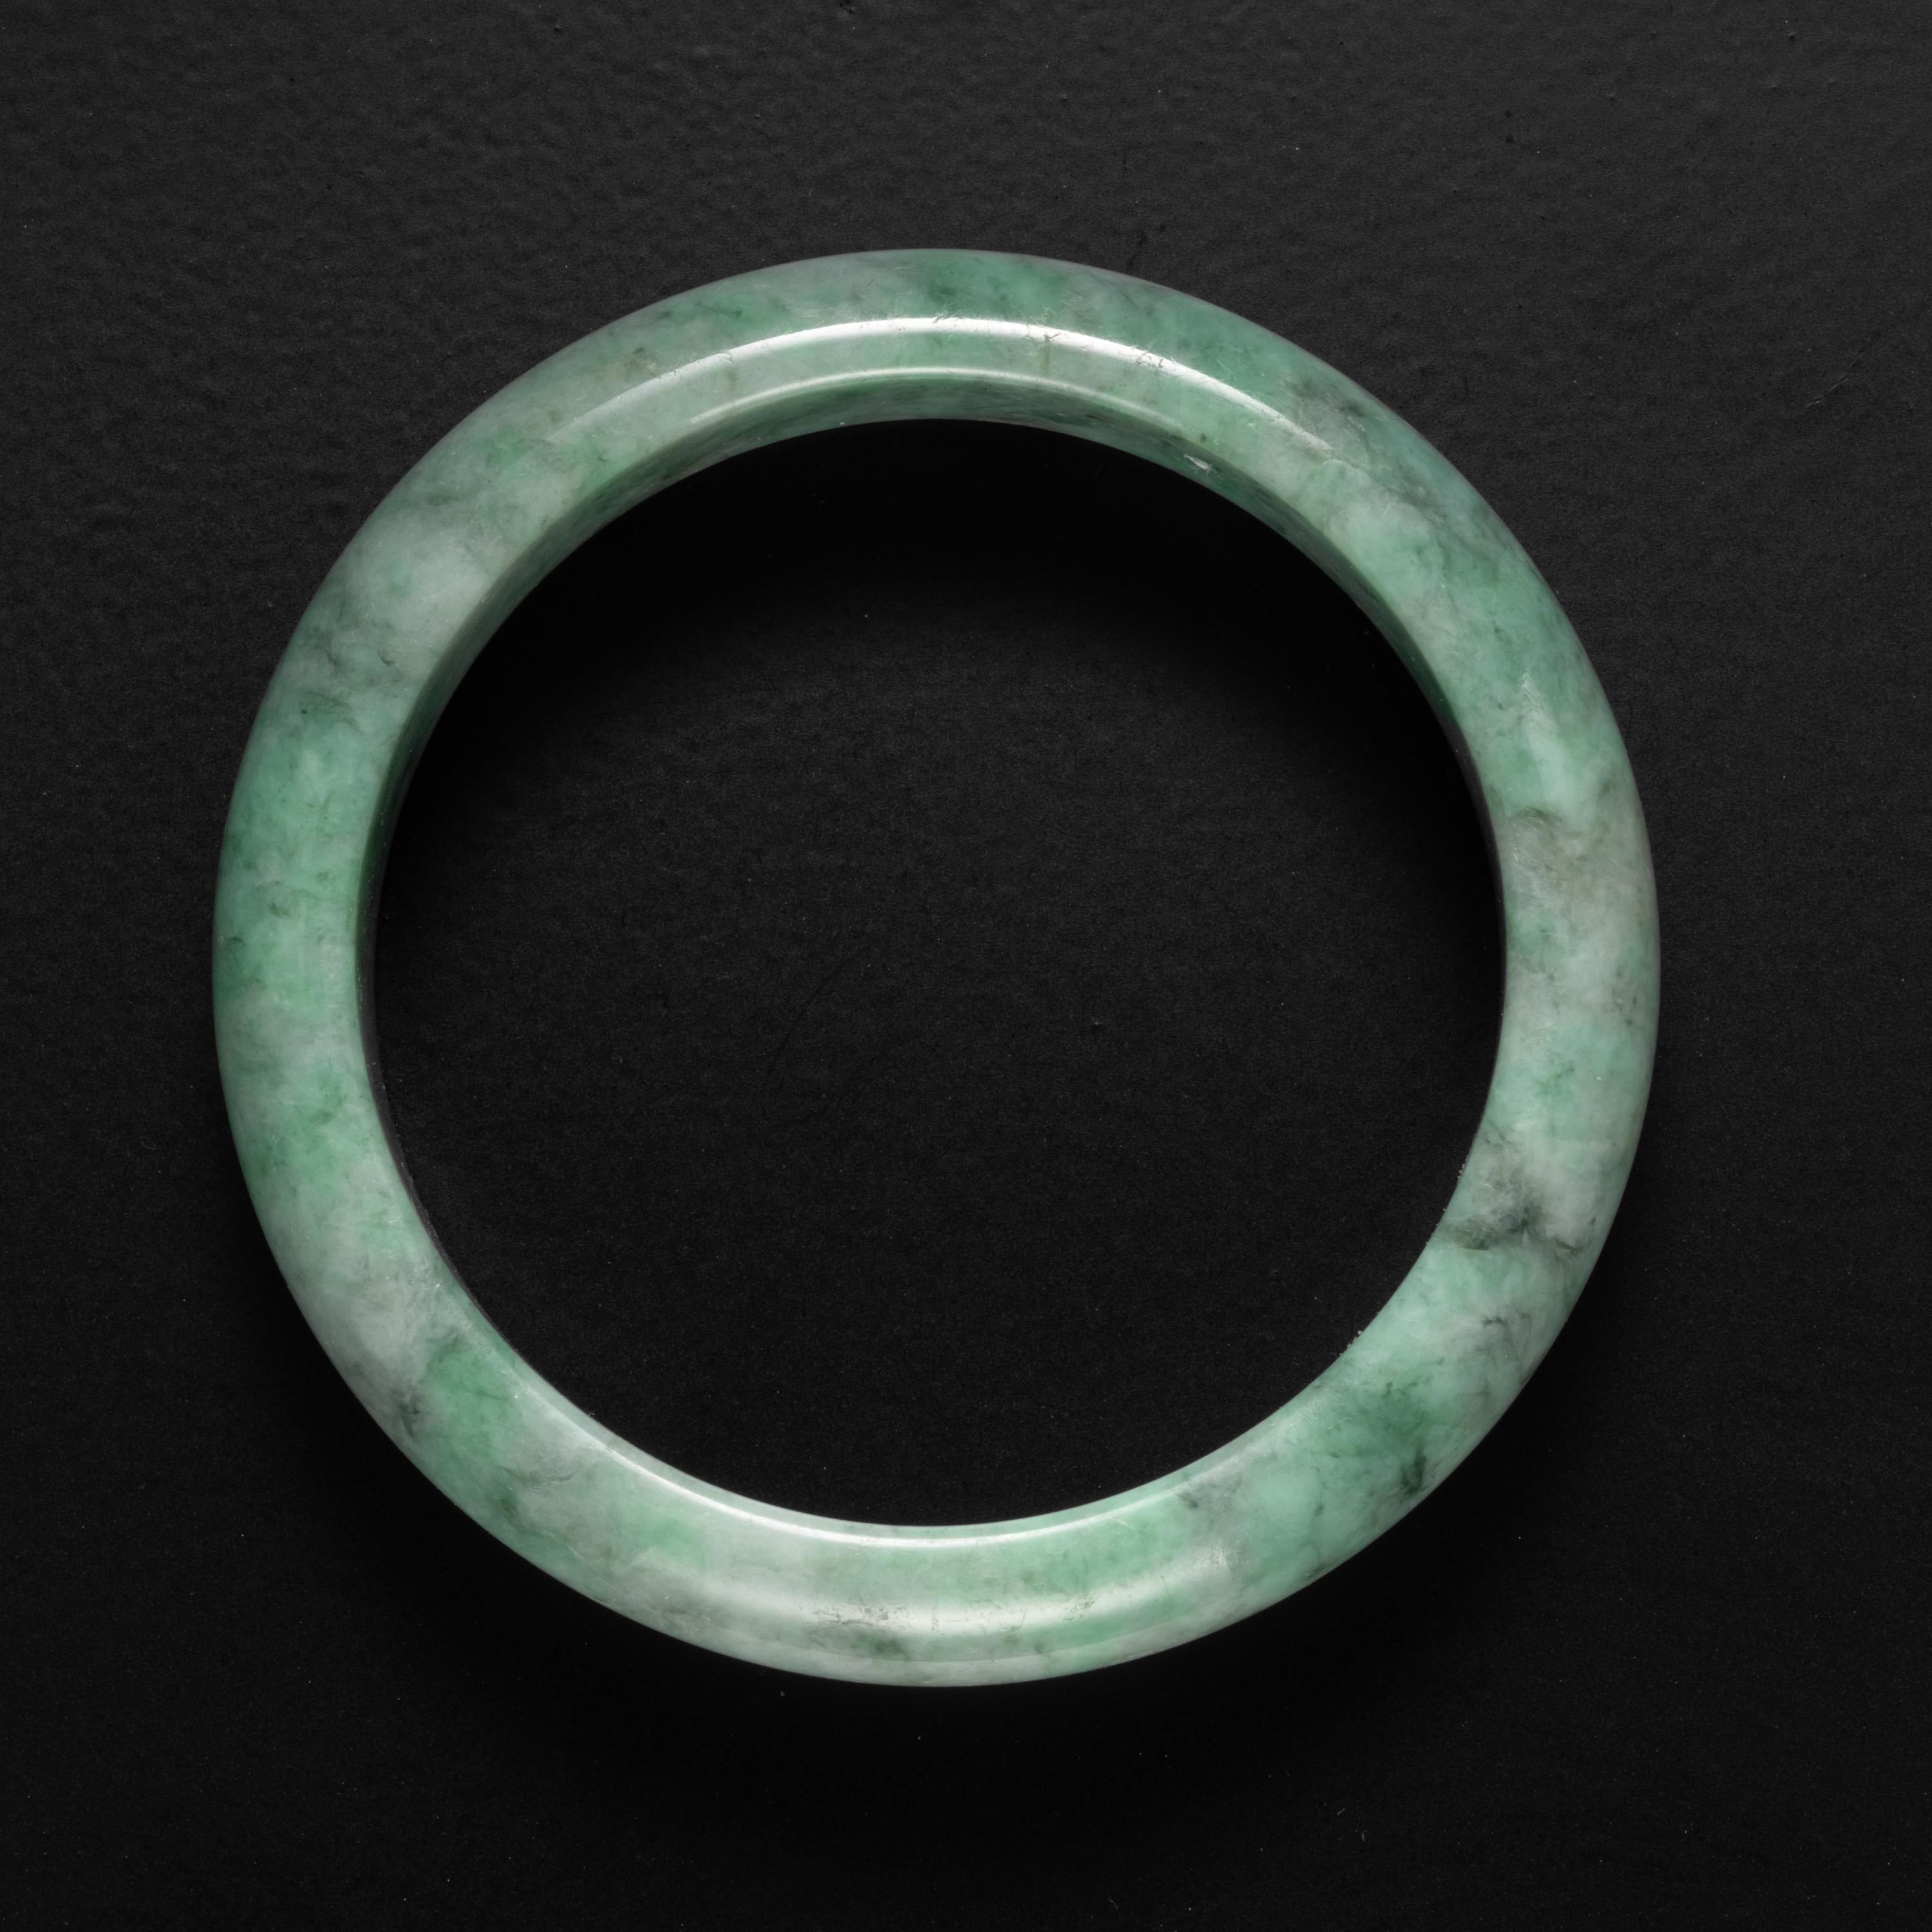 This gorgeous natural and untreated Burmese jadeite jade bangle is a lively mottled apple green. Free from dyes and polymers, this naturally beautiful bangle has an inner diameter of 55mm, meaning it will fit a small to medium wrist. The exterior